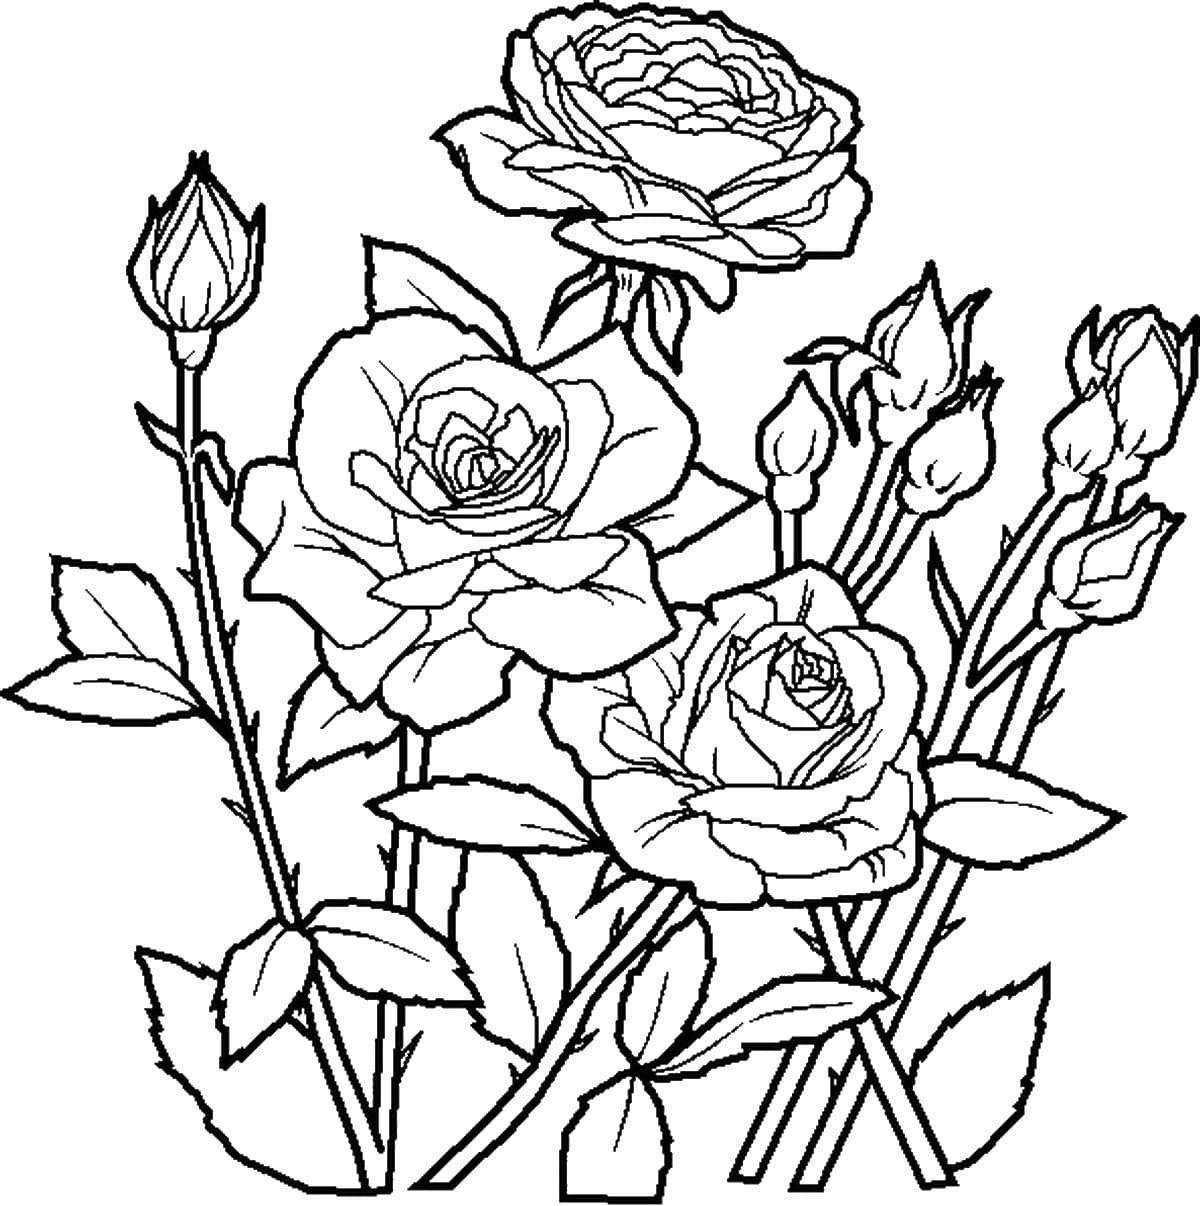 Great rose coloring book for kids